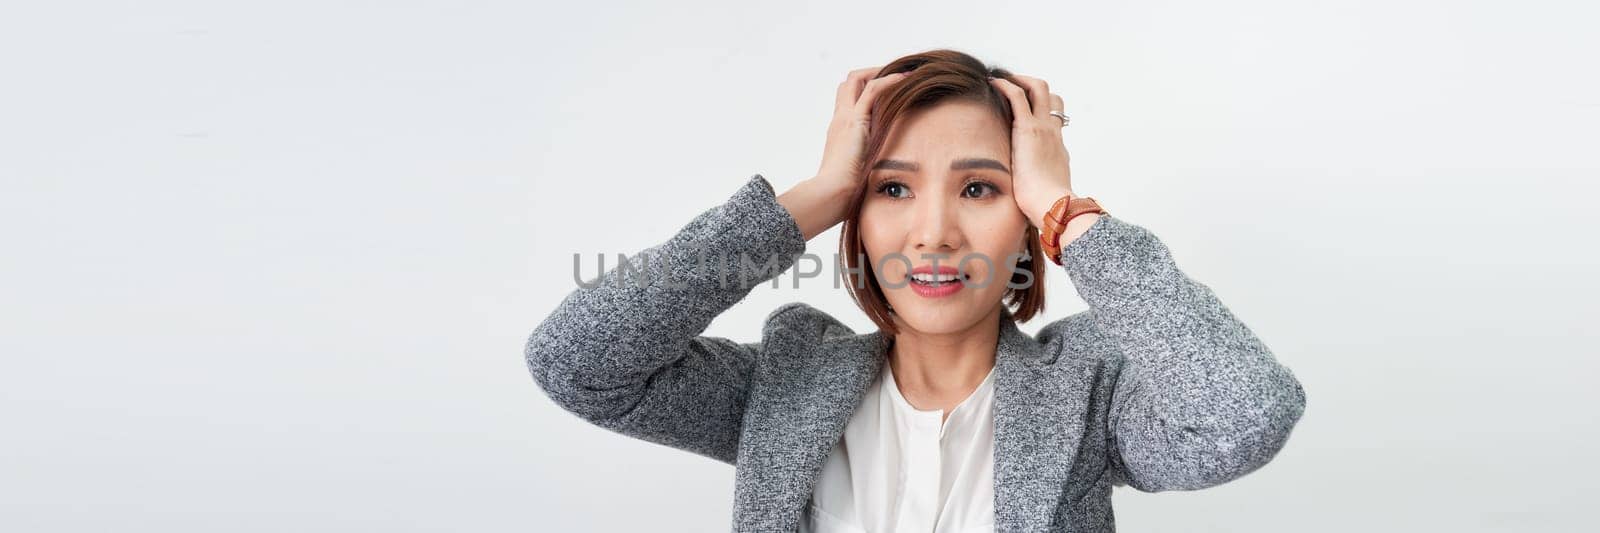 Emotional lady shouting in anger, being aggressive or mad, suffering from stress. headache